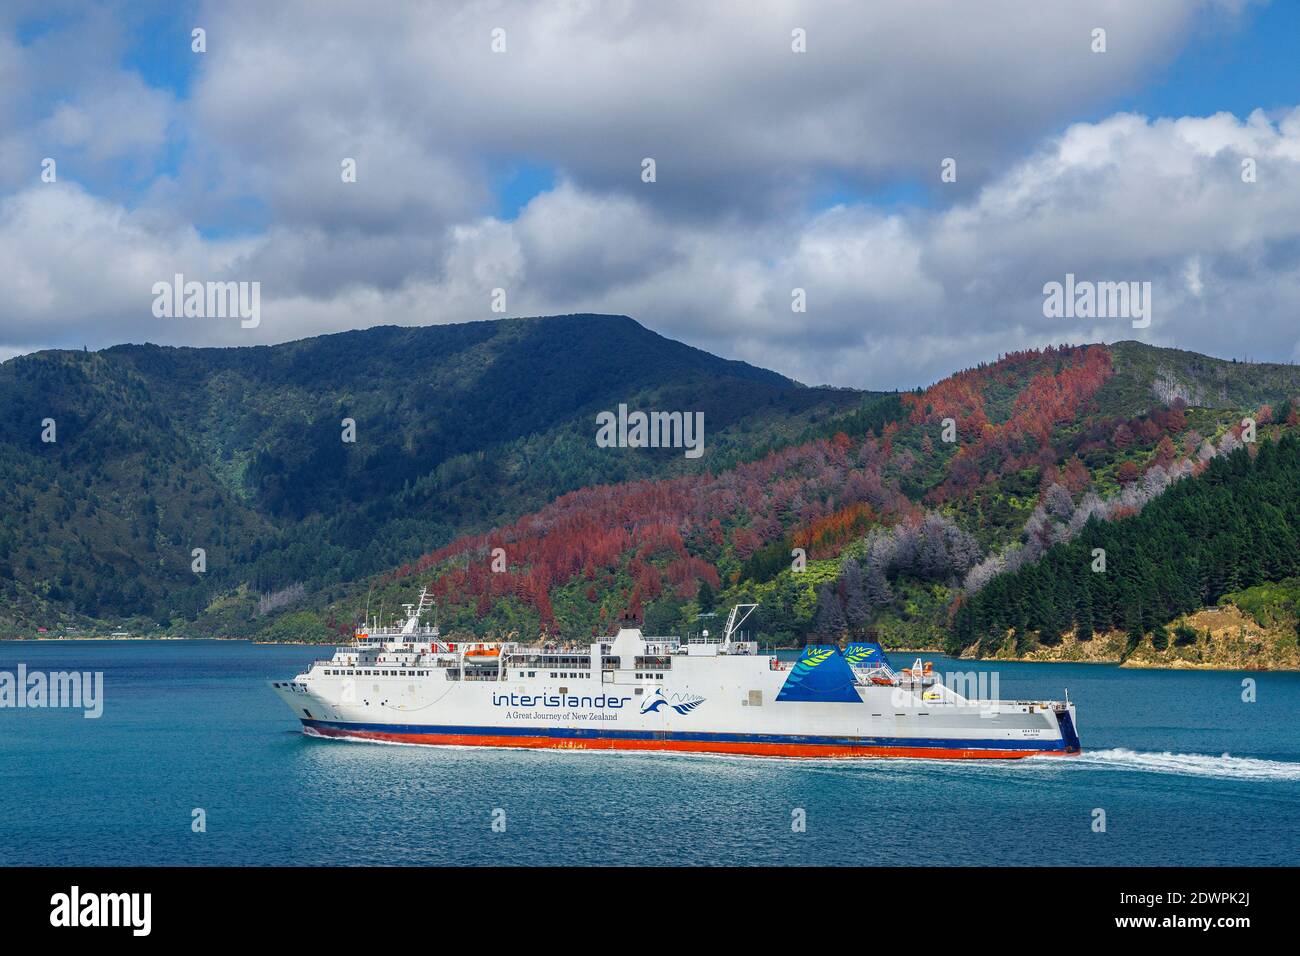 The Aratere interislander ferry in the Cook Strait within the Marlborough Sounds of South Island, New Zealand. Stock Photo